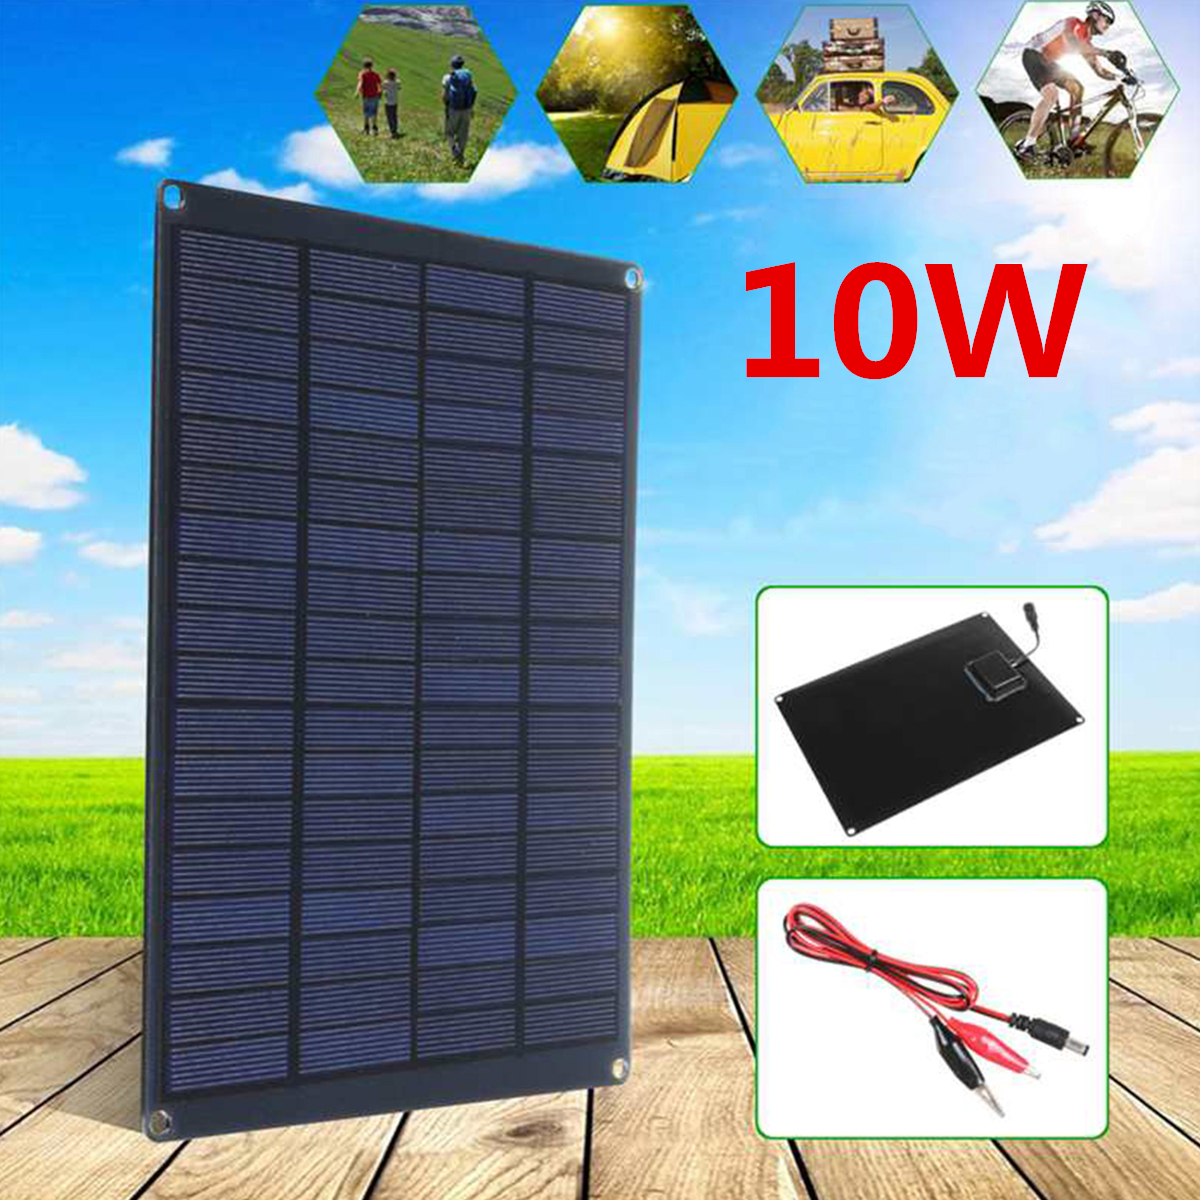 55W-12V-Durability-Waterproof-Monocrystalline-Silicon-Solar-Panel-for-Outdoor-CyclingHikingCampingTr-1565726-1